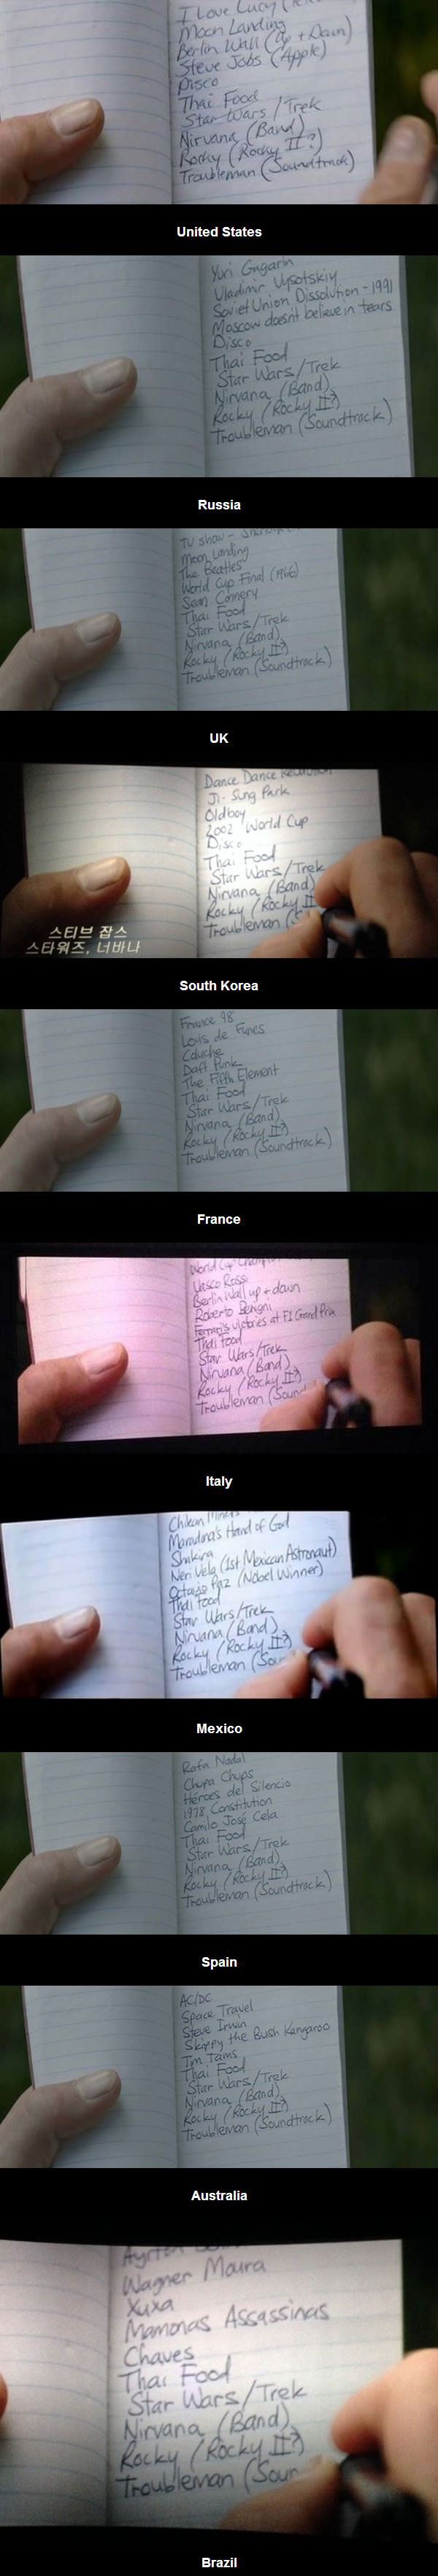 captain america's to do list is different depending on the country the movie plays in